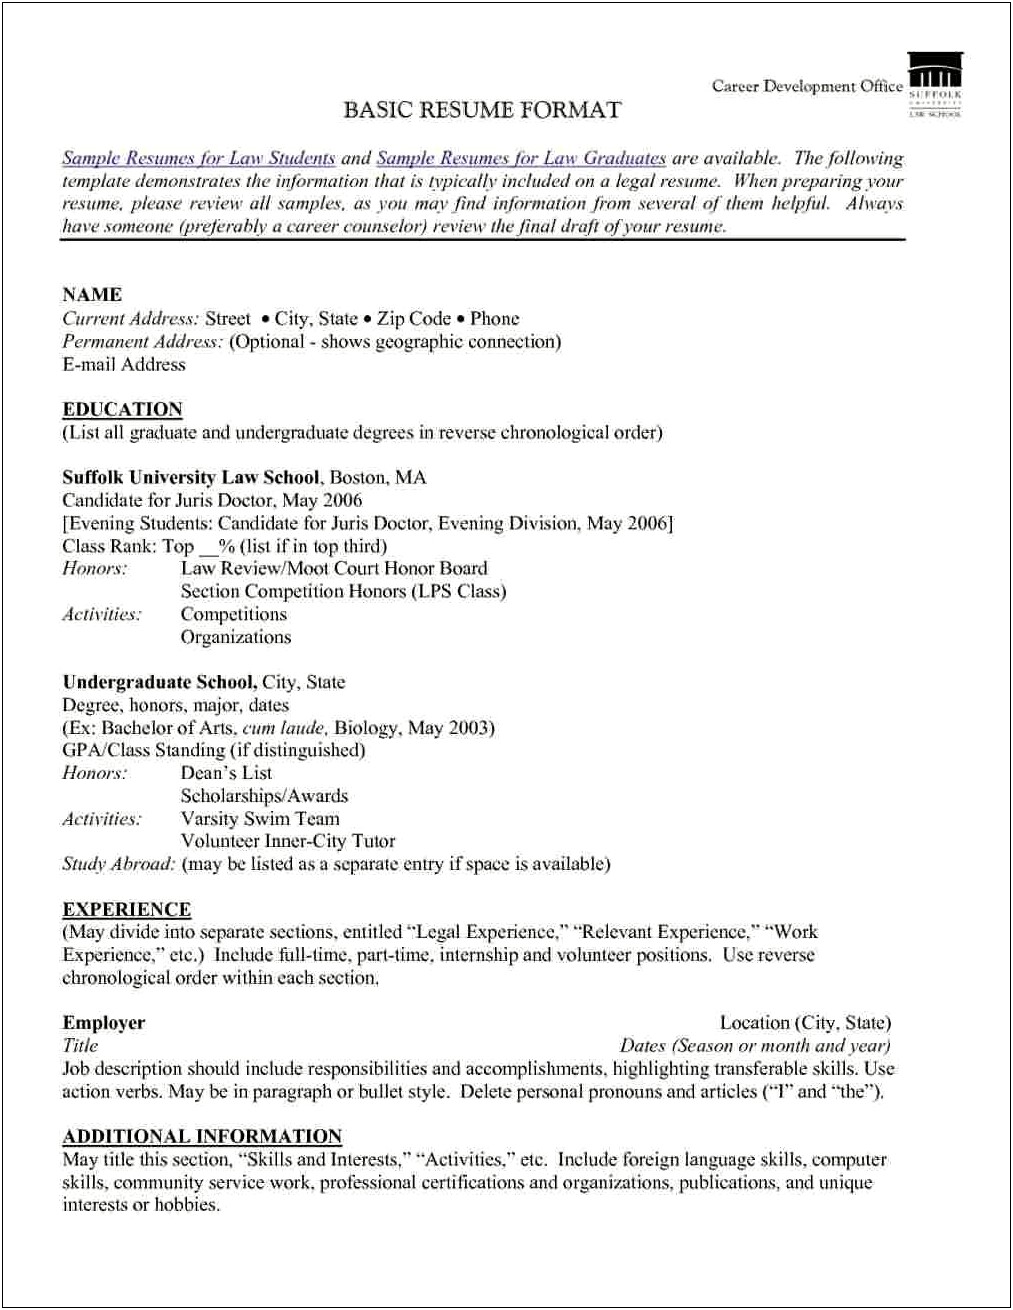 Transferable Skills Section On Resume